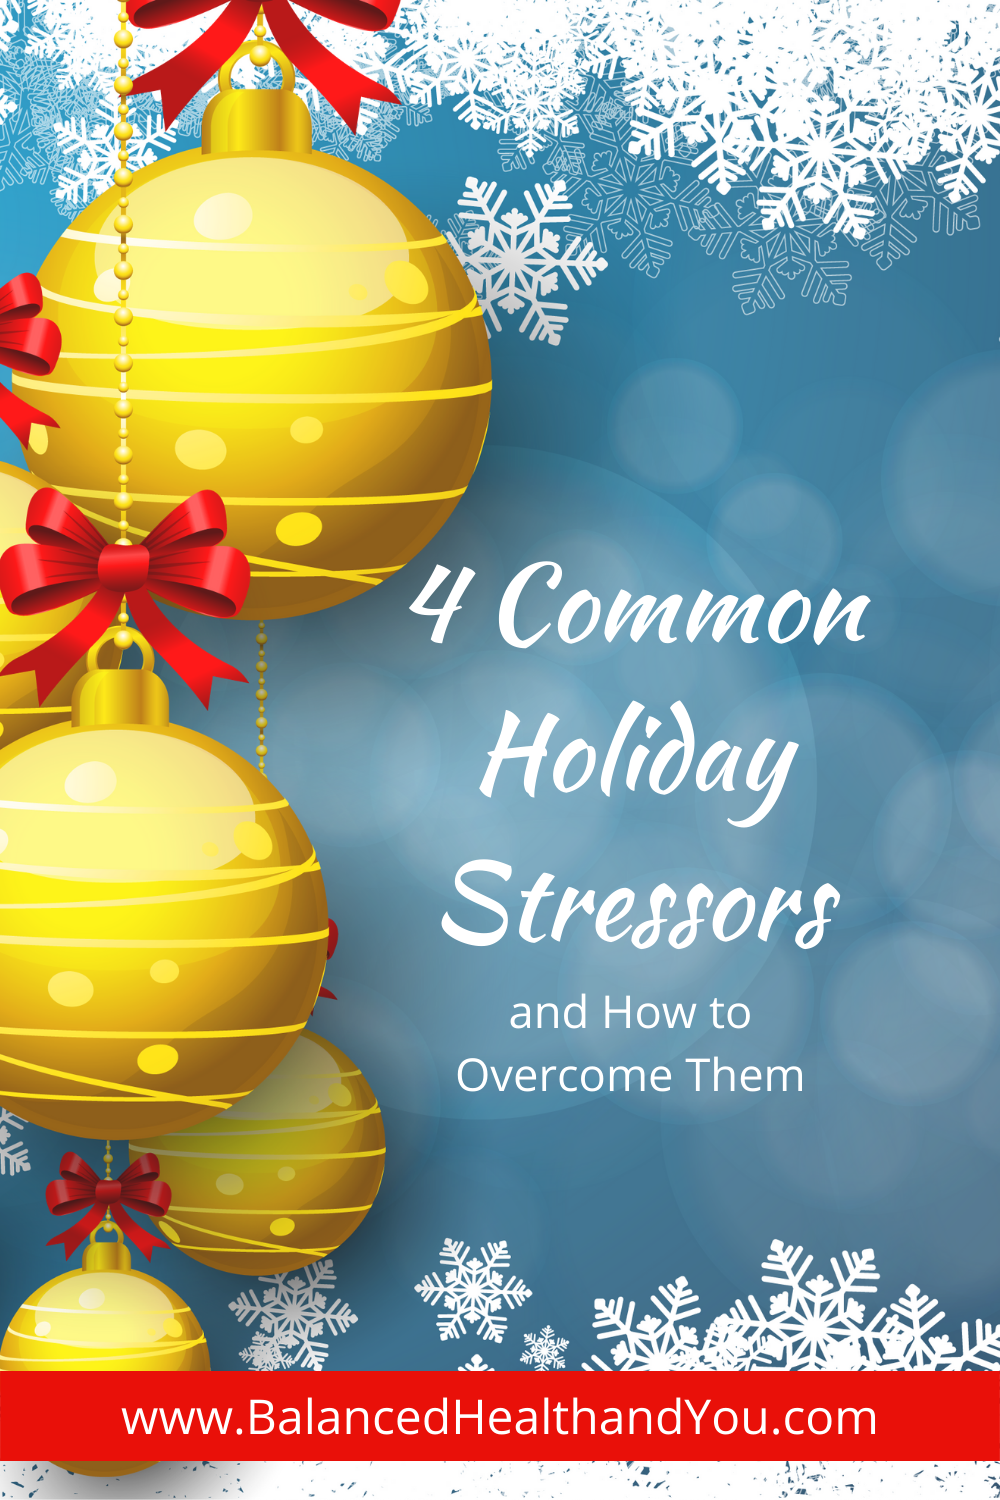 4 Common Holiday Stressors